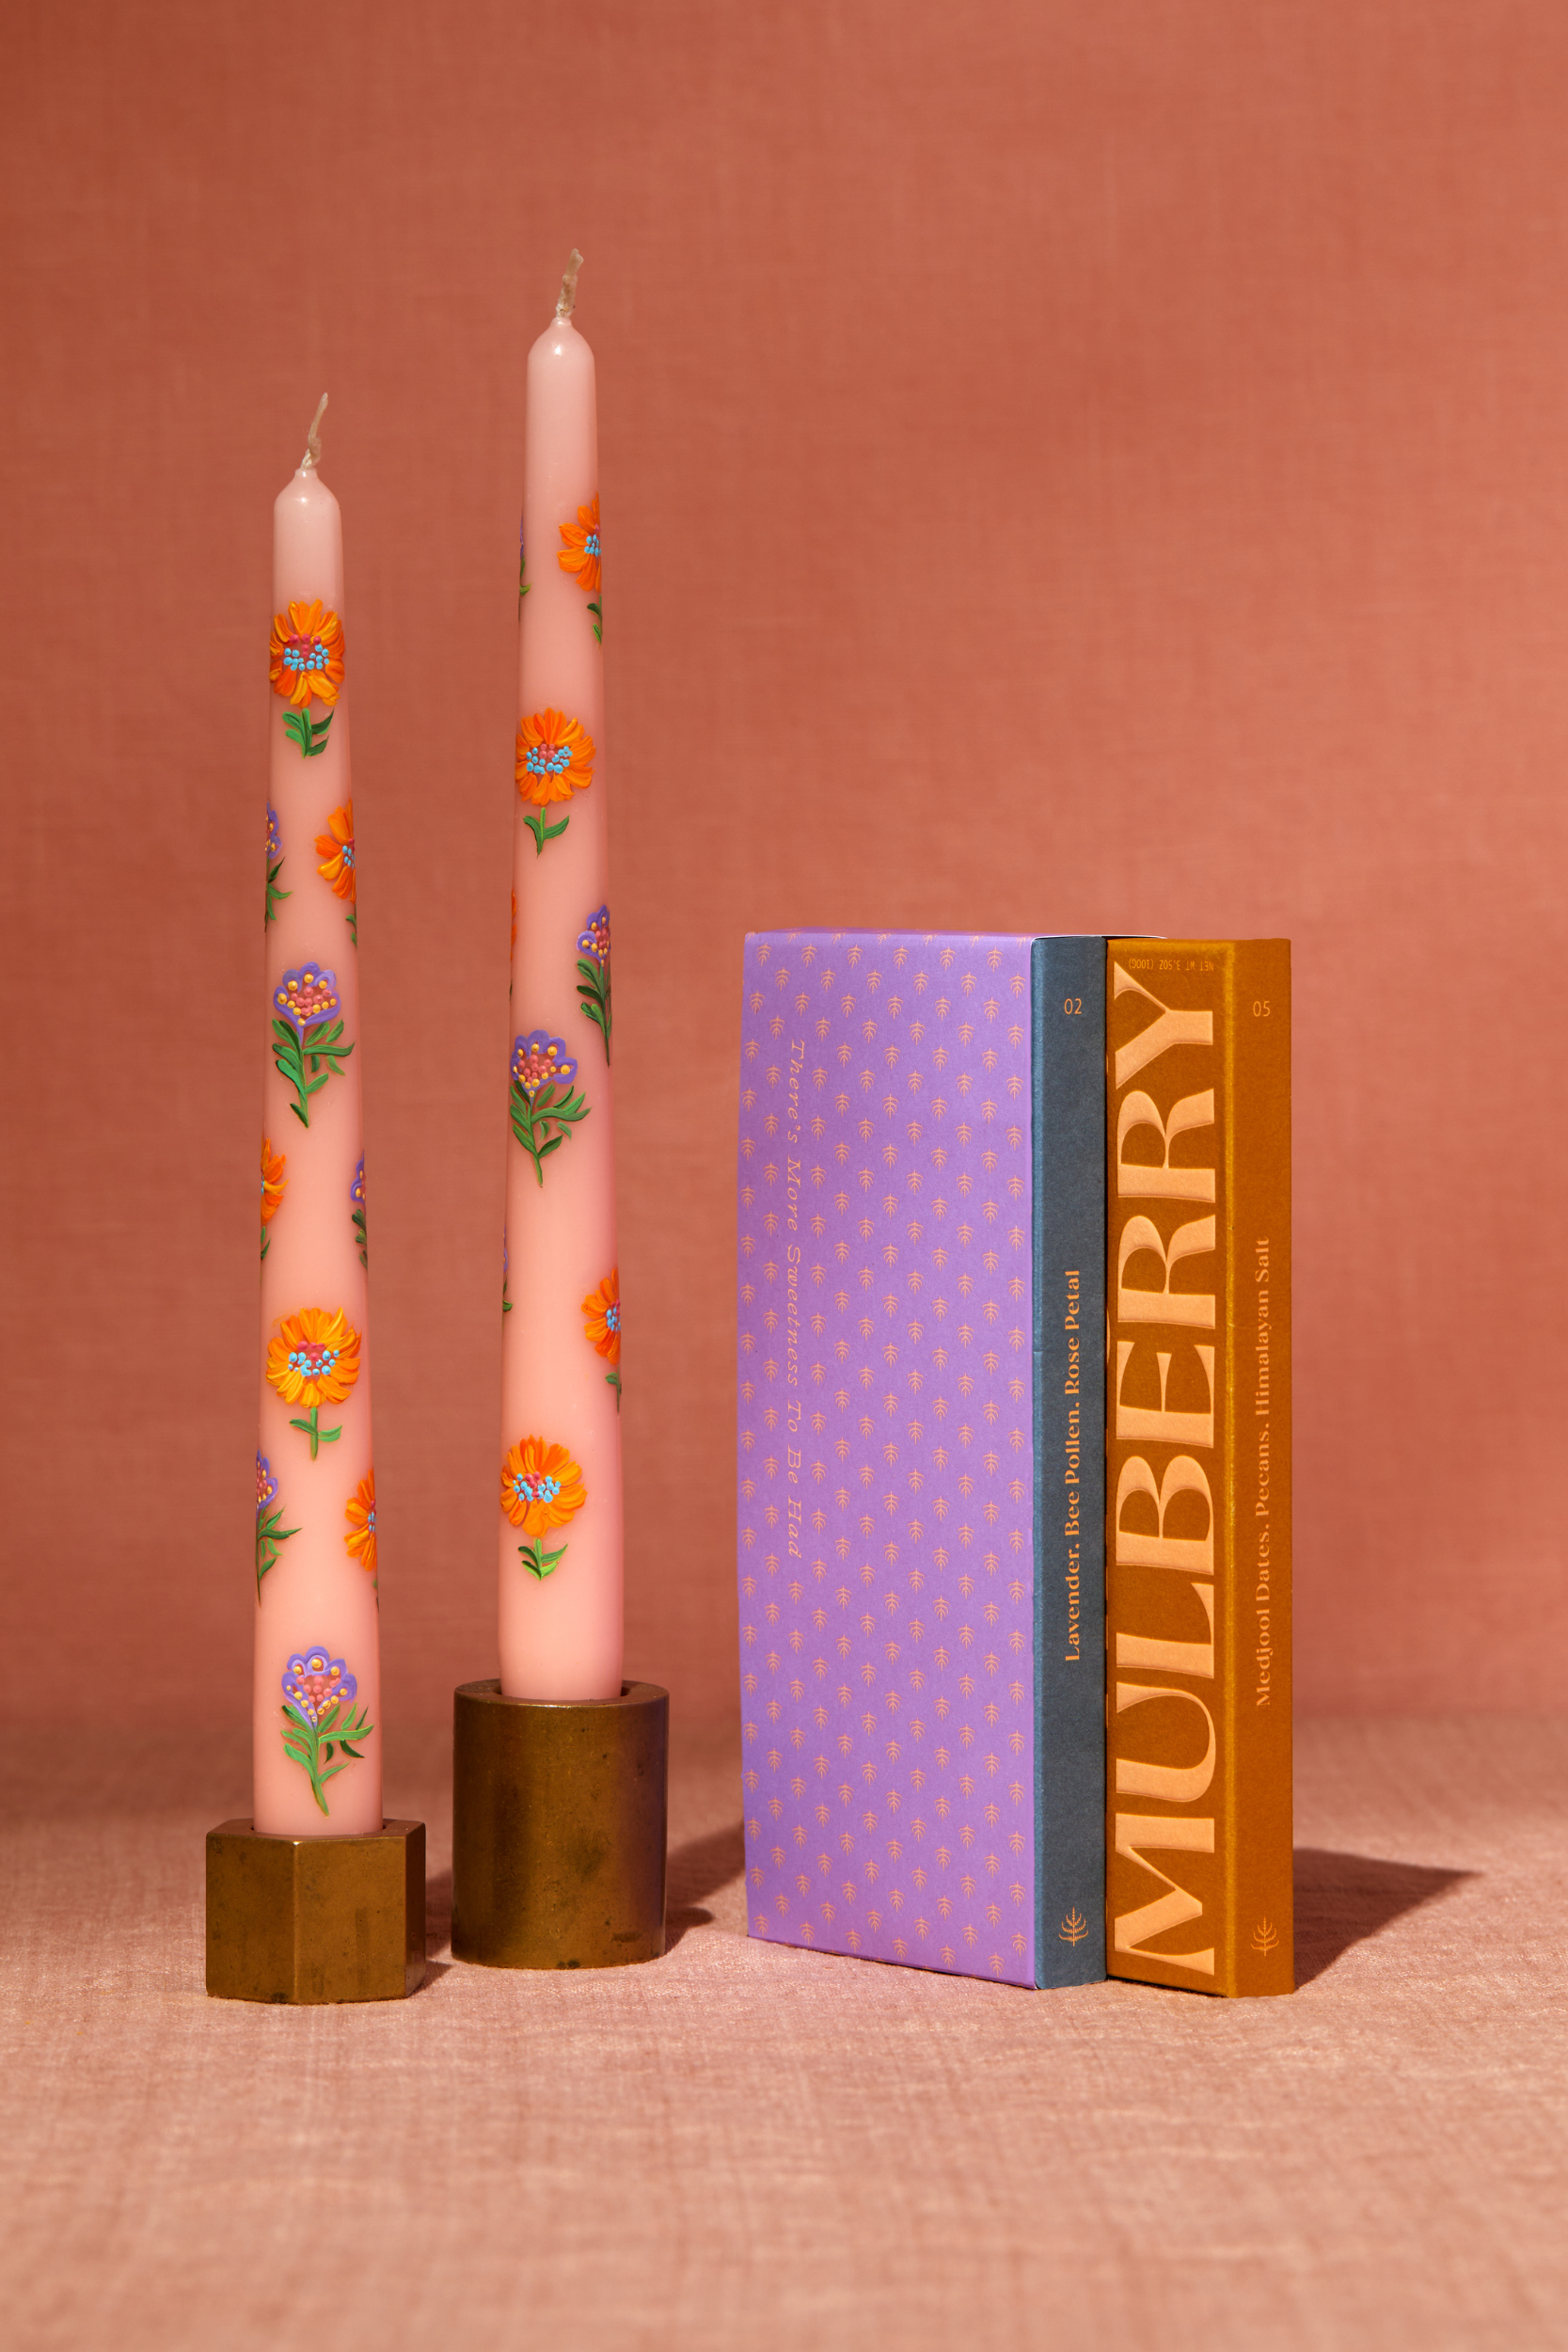 A set of two 10" tapered peach candles stands in brass candlesticks. Each candle is adored with handpainted flowers in peach and lavender shades. To the right is a gift set of 2 chocolate bars wrapped in a mulberry printed lavender gift paper. The bars contain Lavender, Rose Petal, Bee Pollen date sweetened chocolate and Medjool Date, Pecan, Himalayan Salt date sweetened chocolate, both with no added sugar. The image is shot straight on with warm light on a peach backdrop.